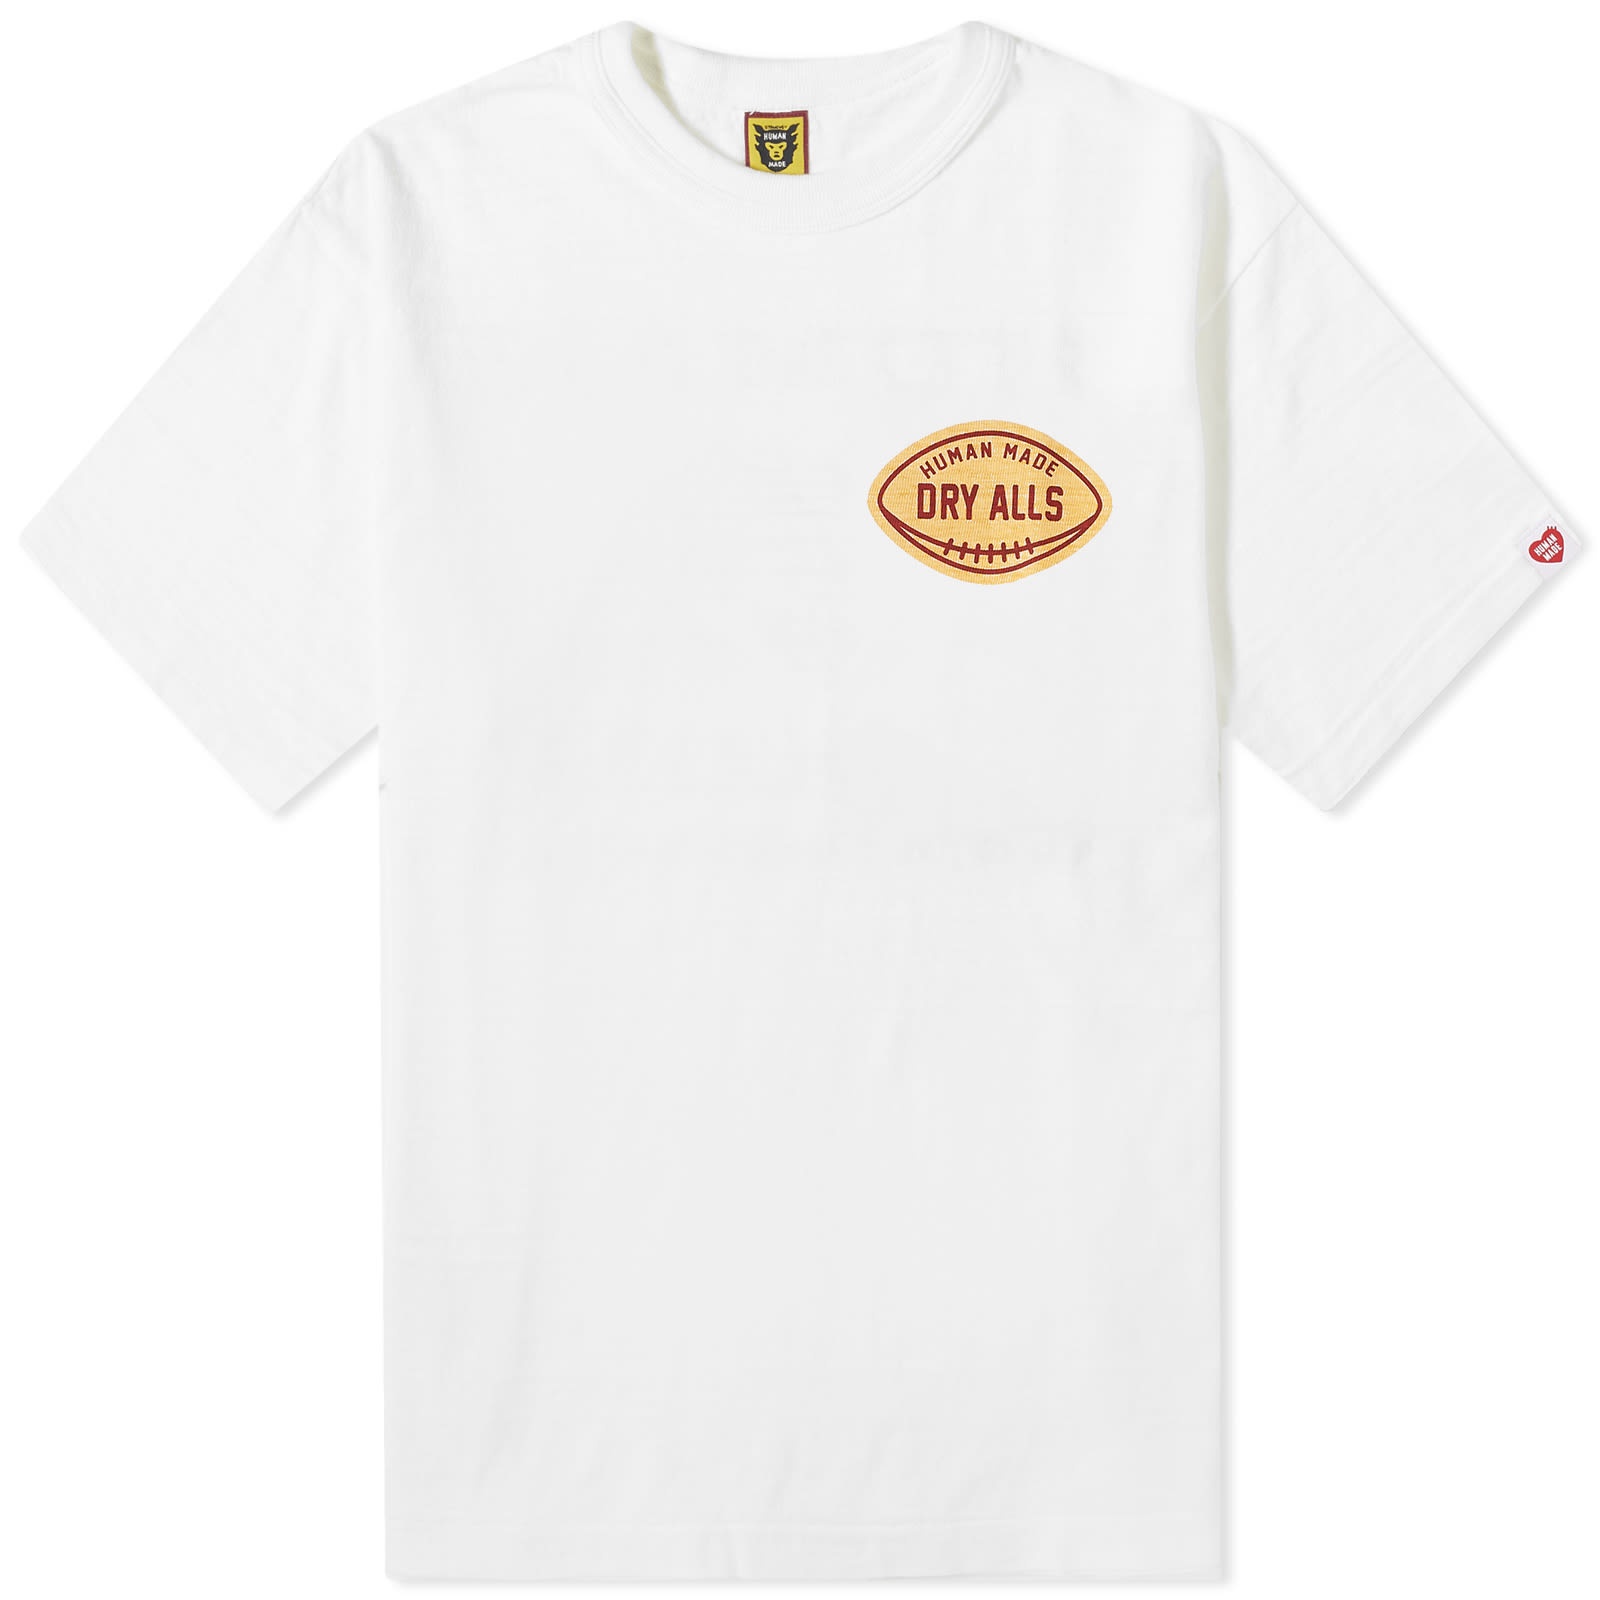 Human Made Dry Alls Past T-Shirt - 1